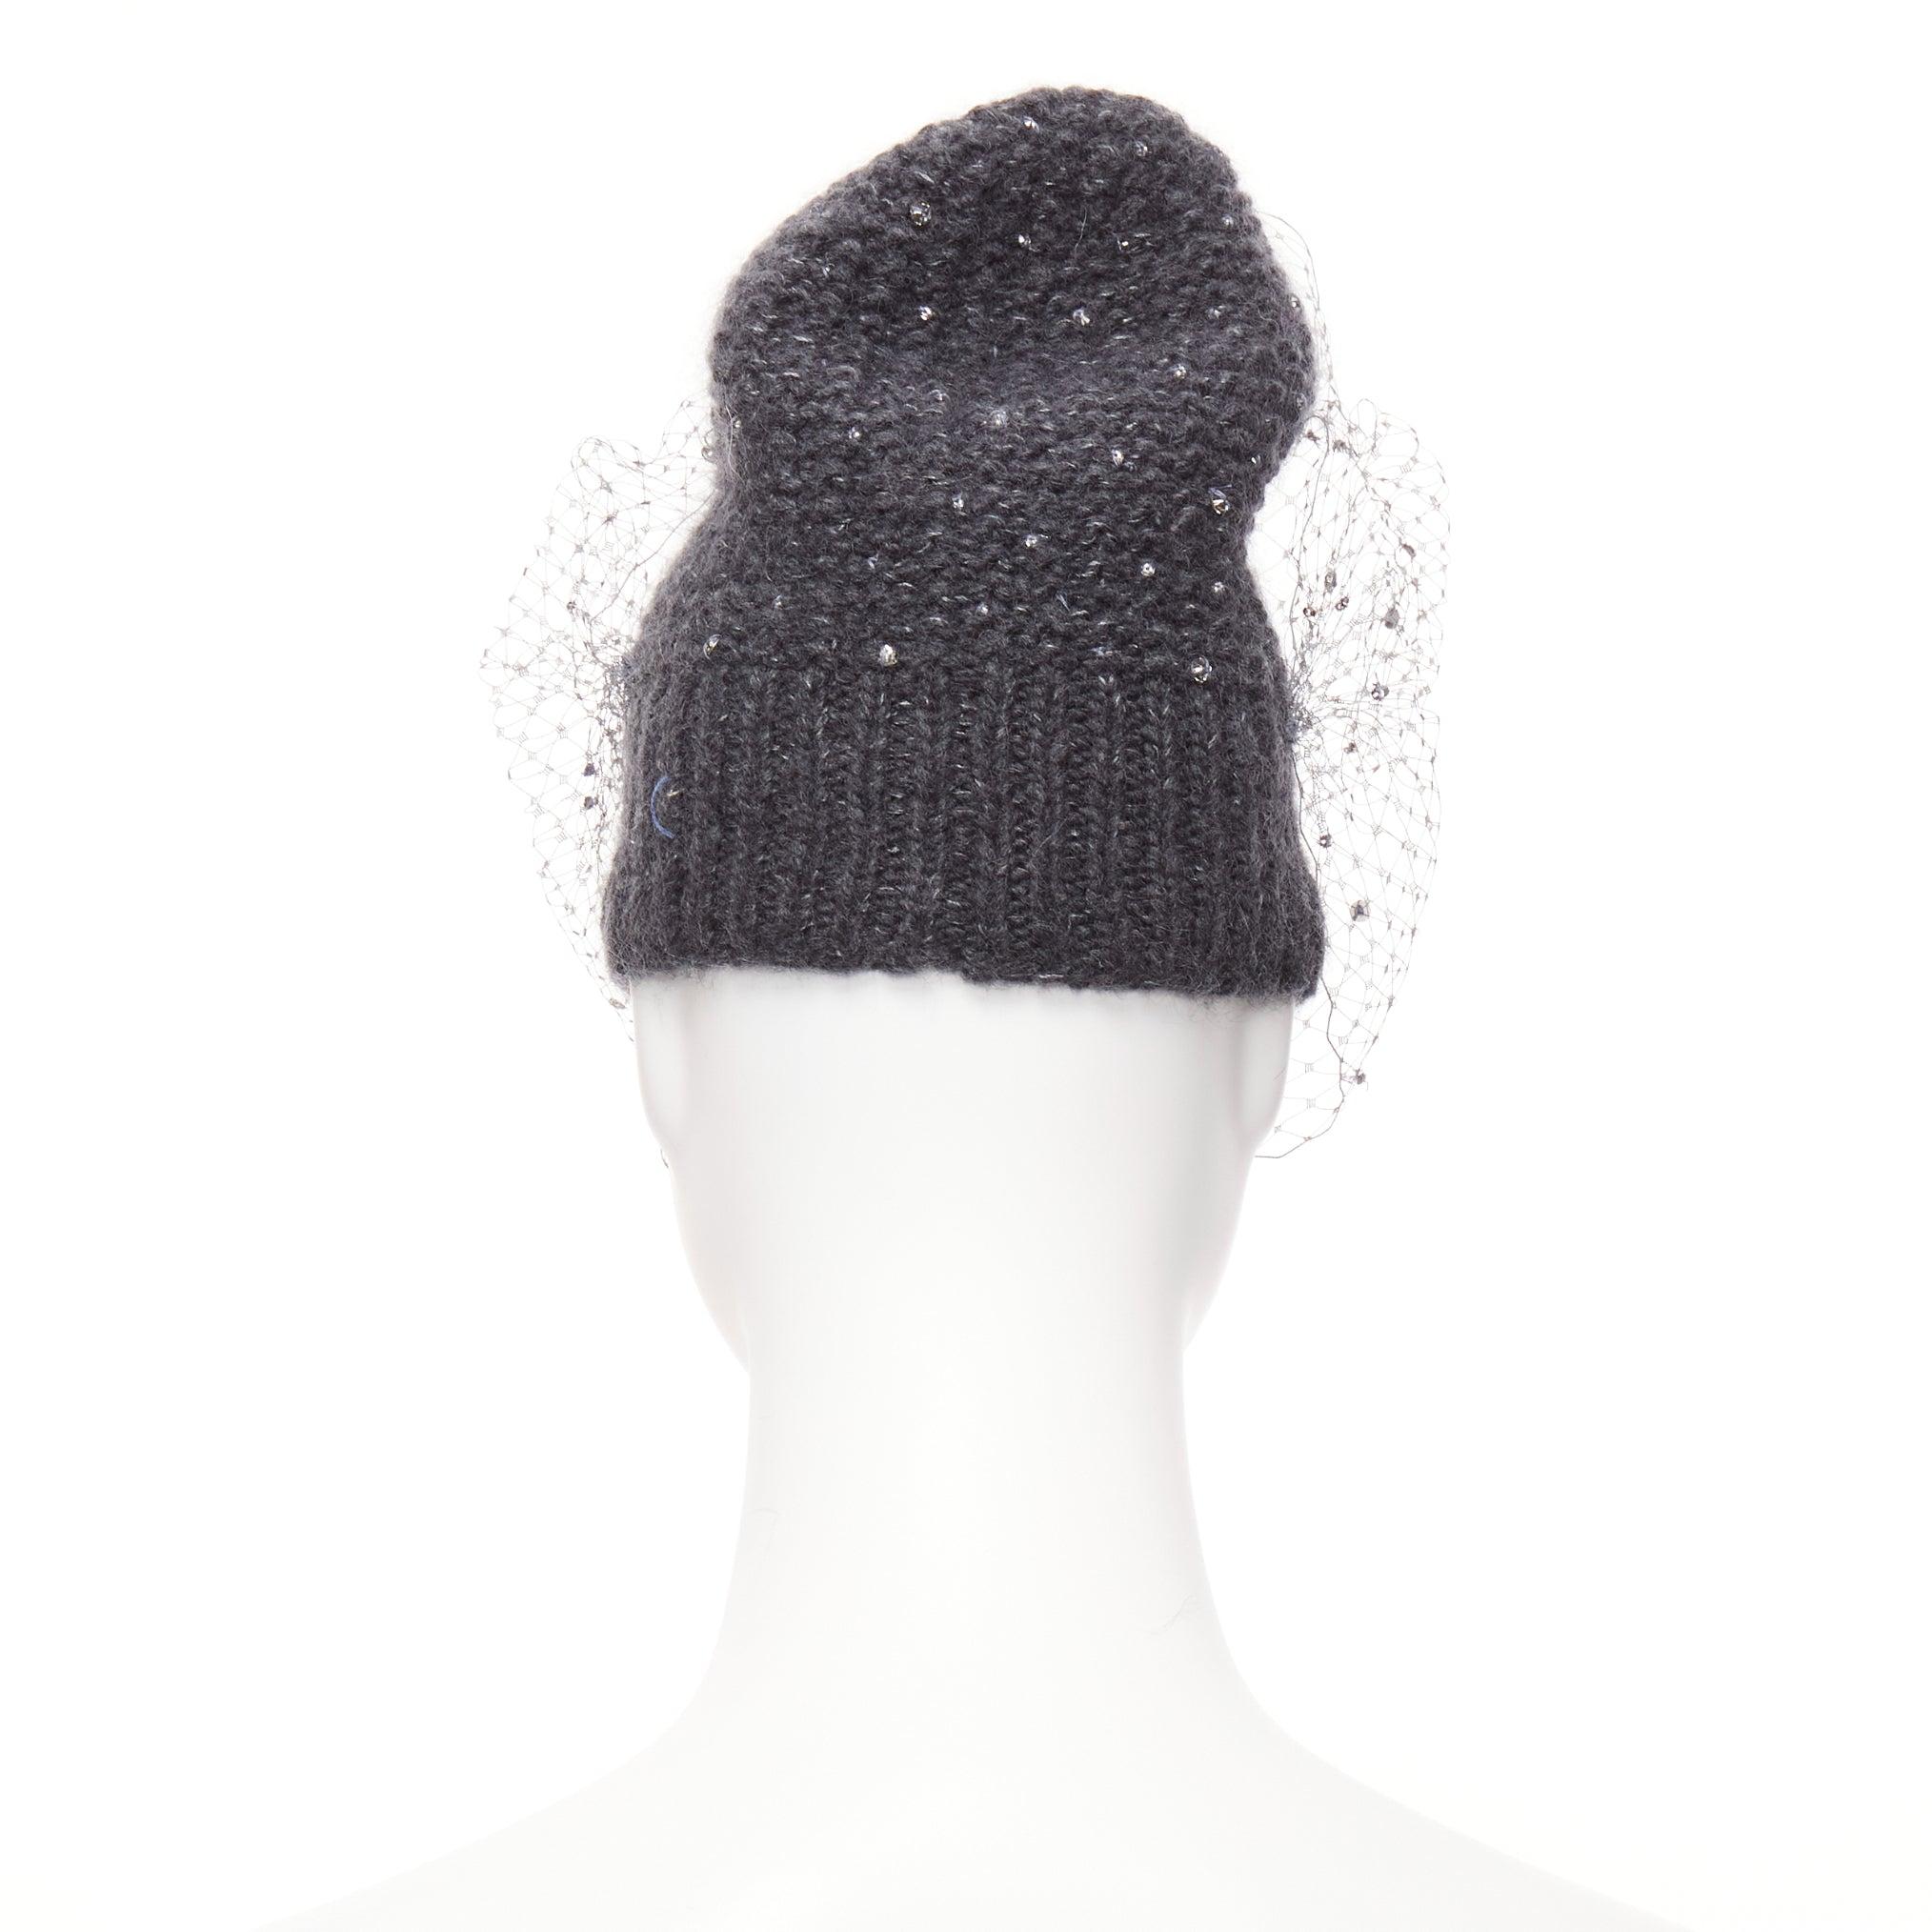 JENNIFER BEHR grey charcoal crystal beads veil round top beanie hat For Sale 1